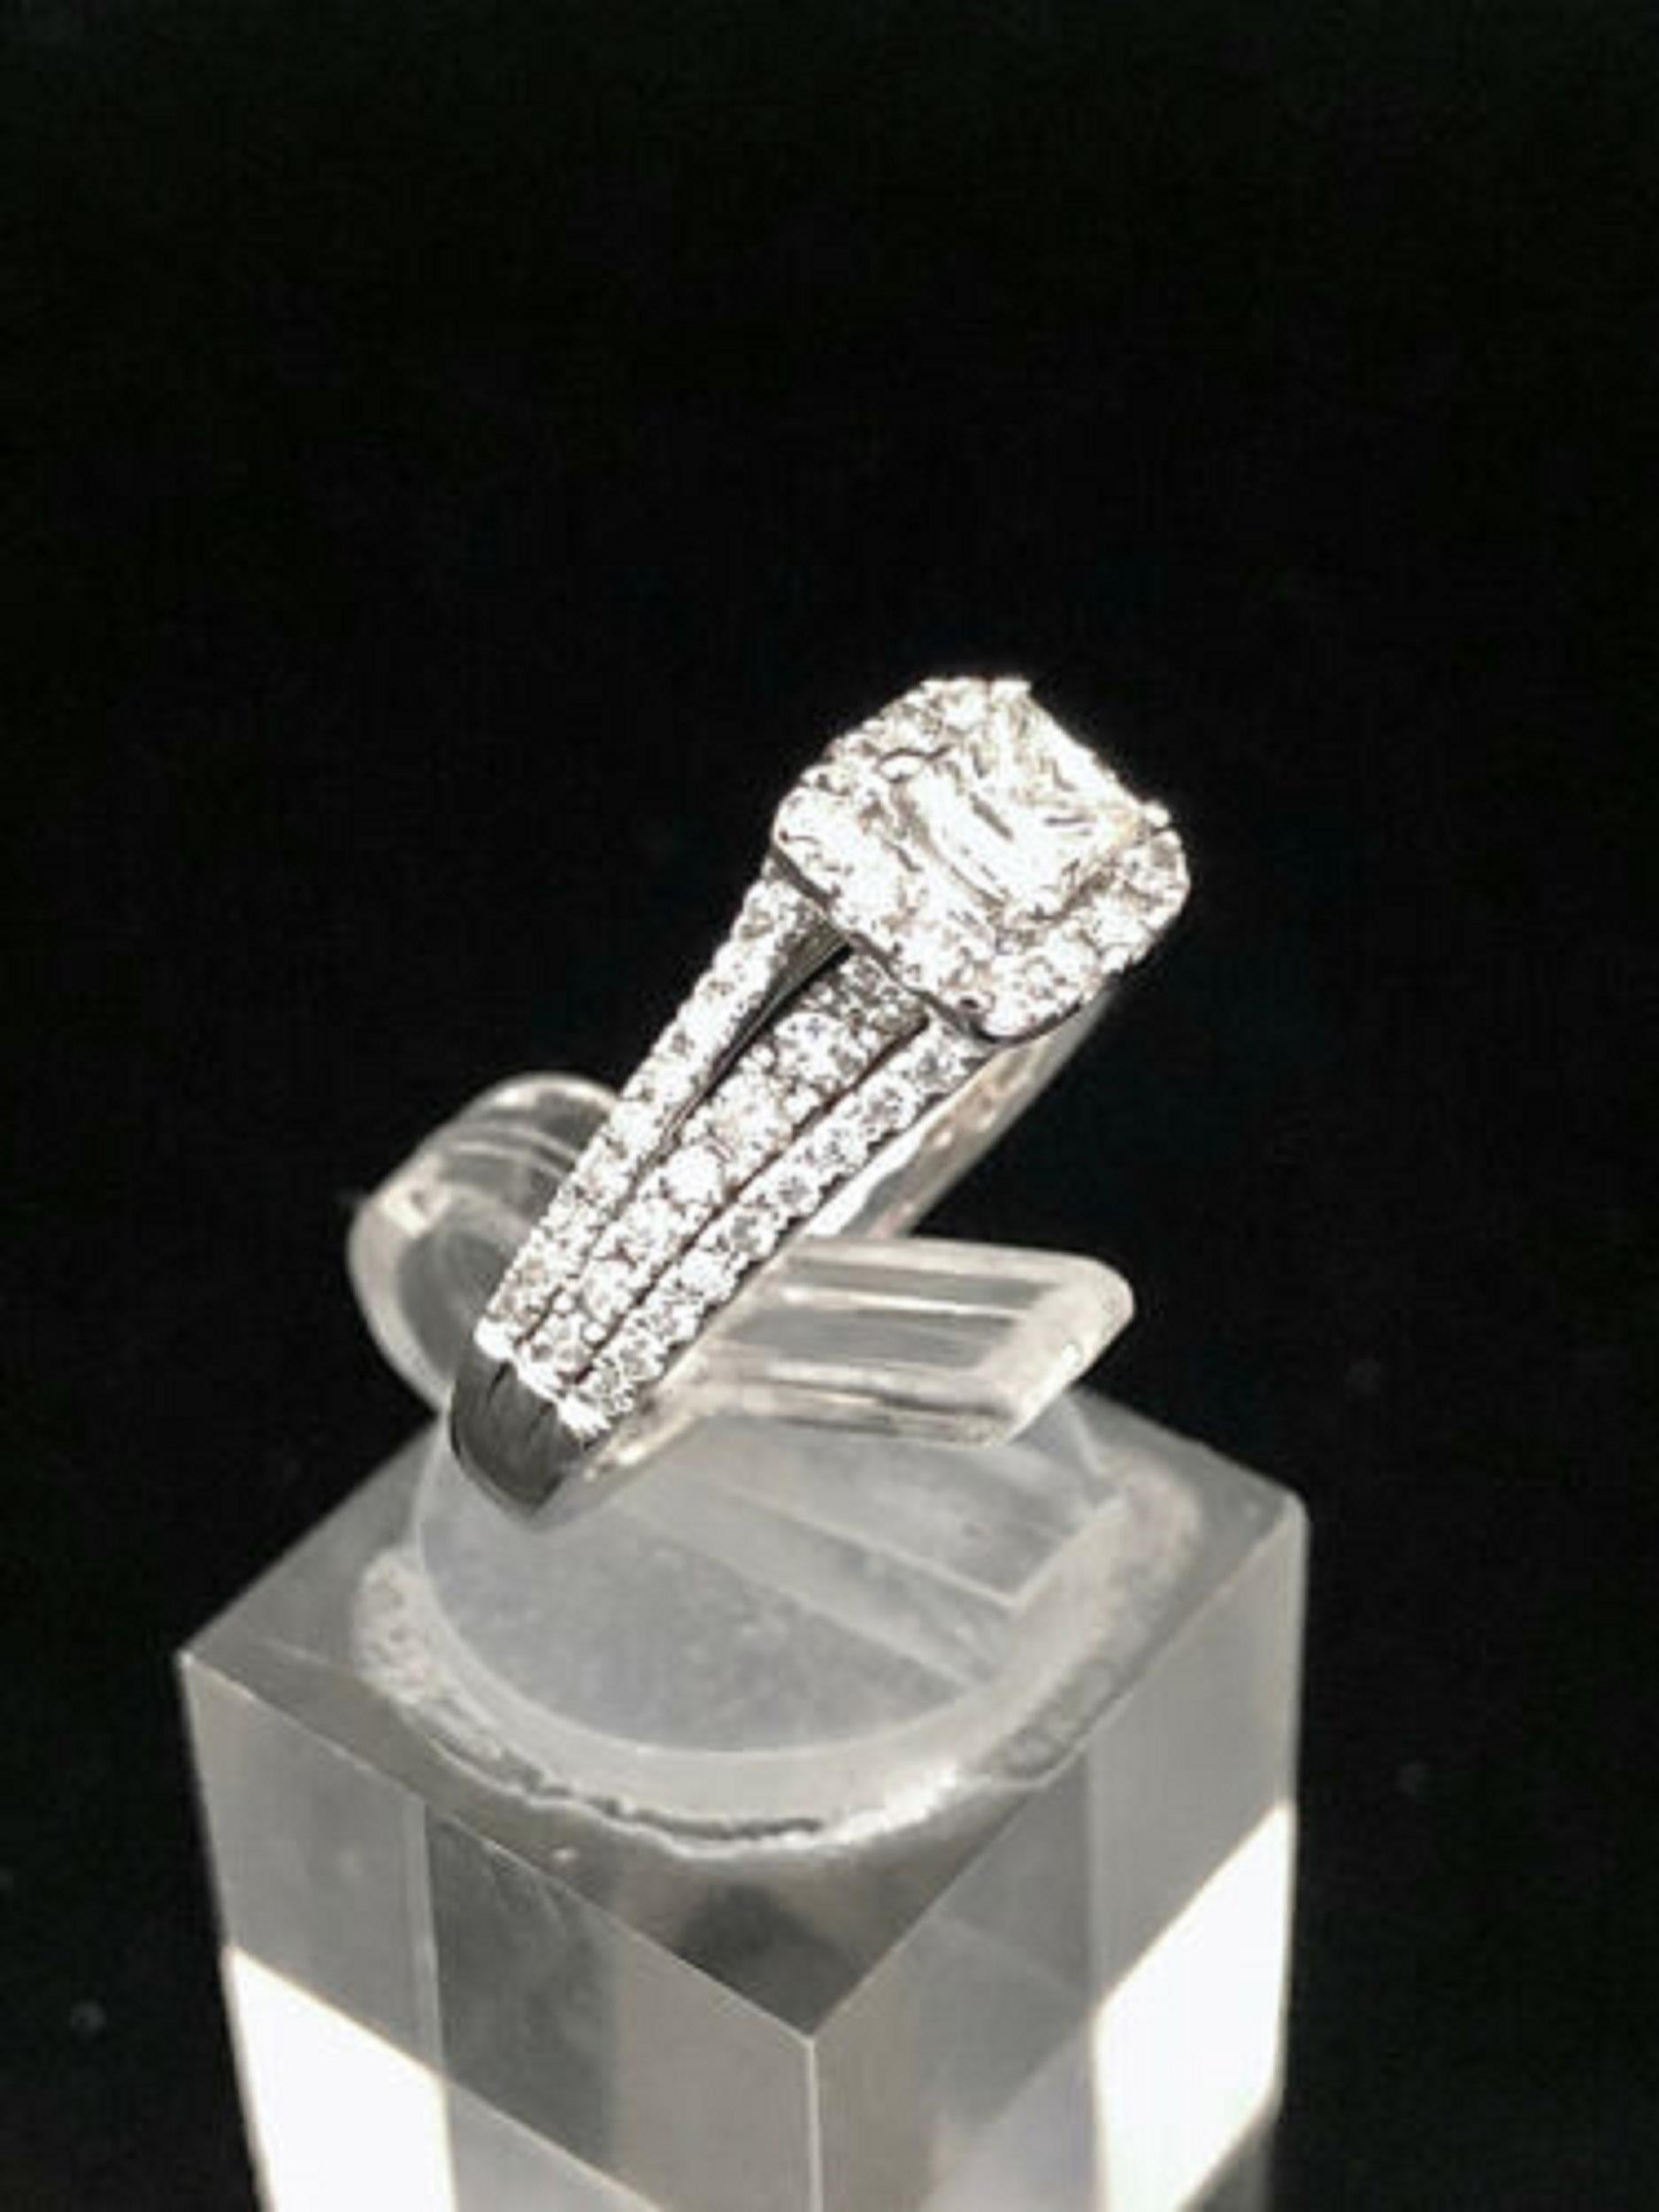 Up for sale:

This great looking solid 14k white gold princess cut natural diamond halo with round cut natural diamond accents engagement ring. This ring is featuring a 1.50 ctw princess and round diamonds
Center Diamond: G color; SI2 clarity (eye